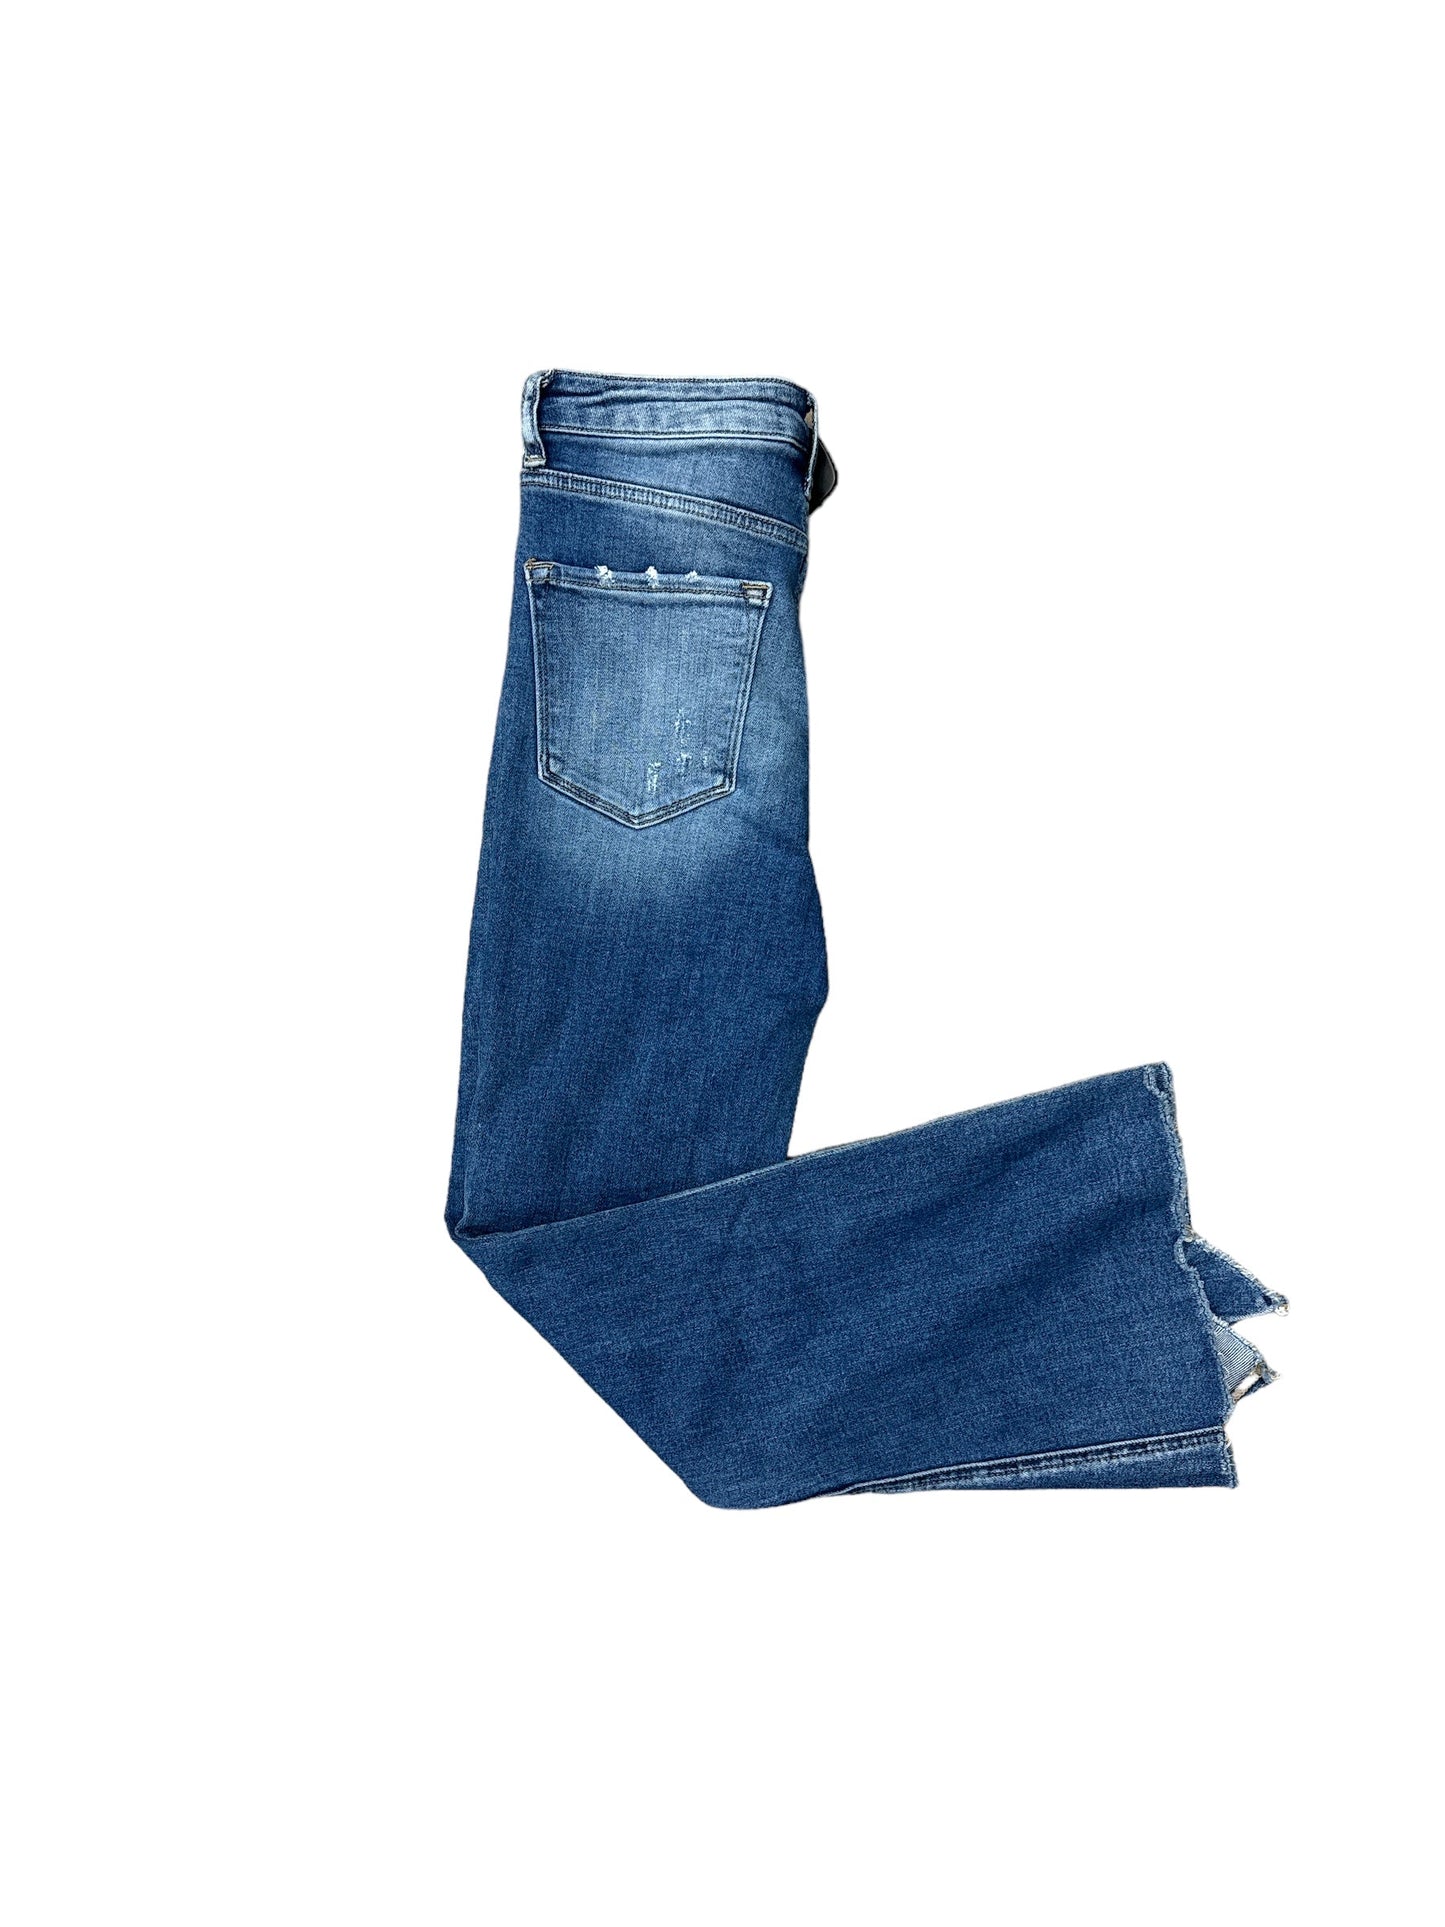 Jeans Flared By Vervet  Size: 0